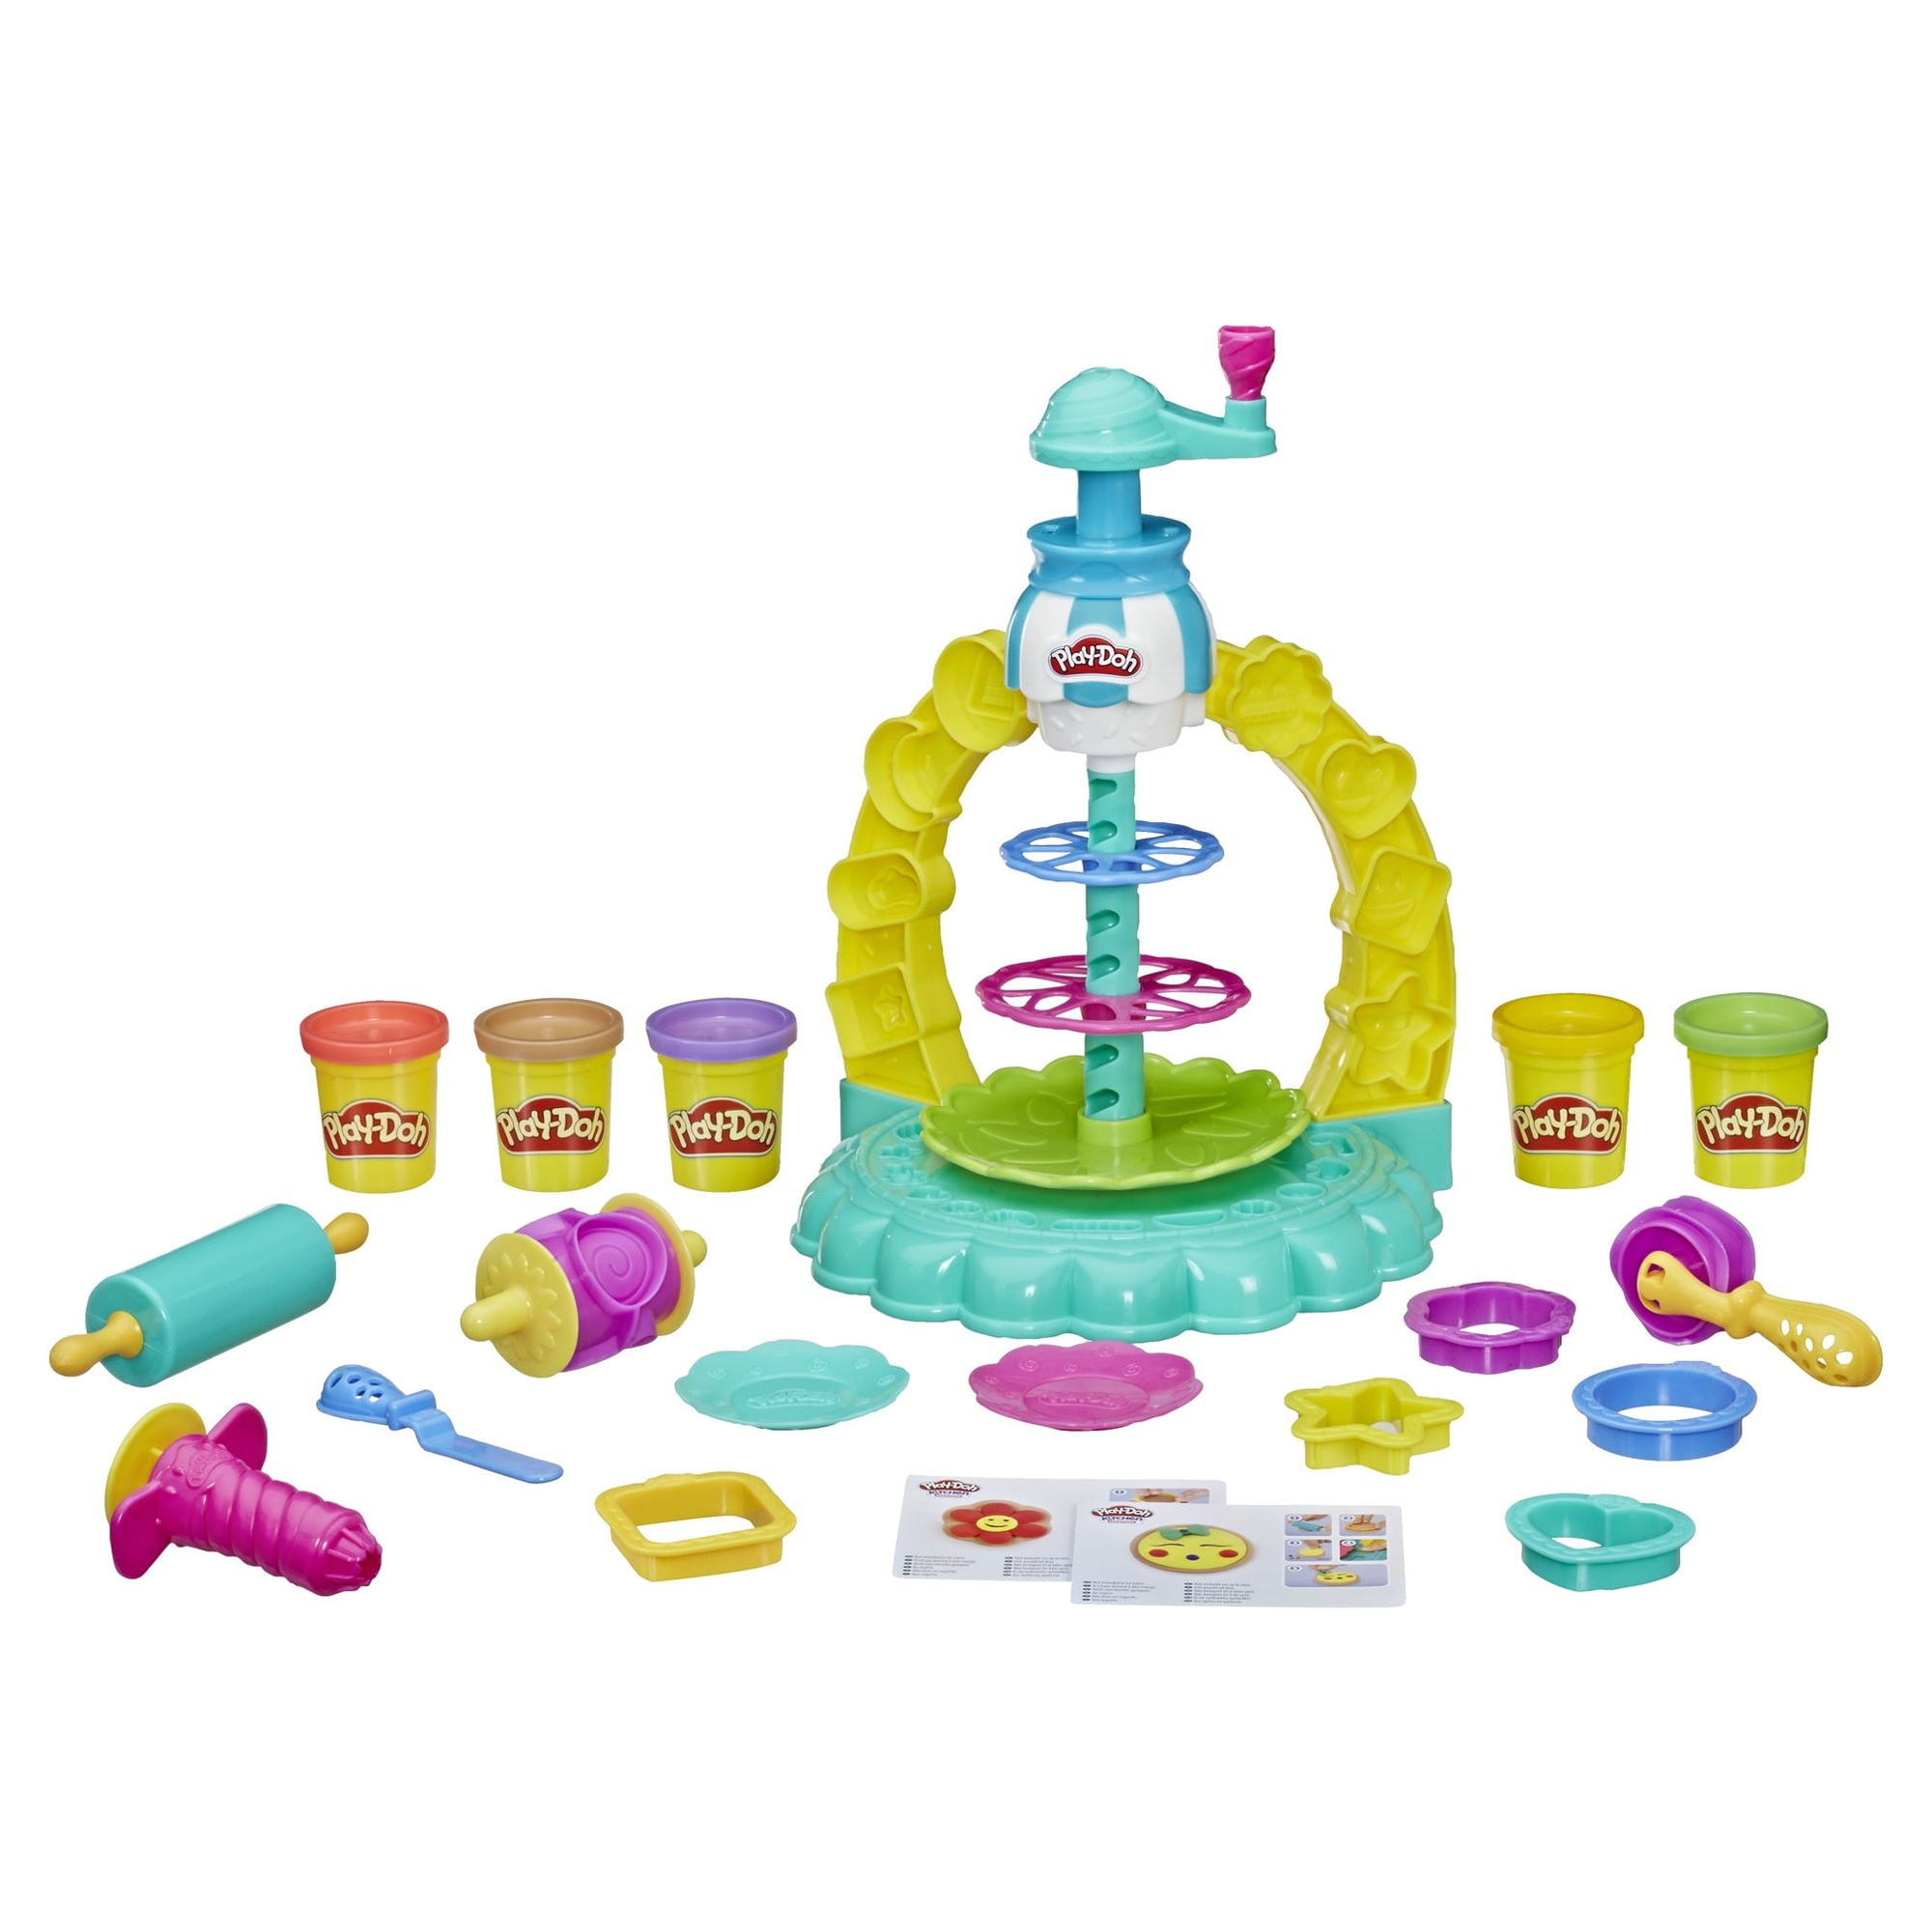 Wow, Rare Freebie!!! FREE Play-Doh Kitchen Creations Deal!!!